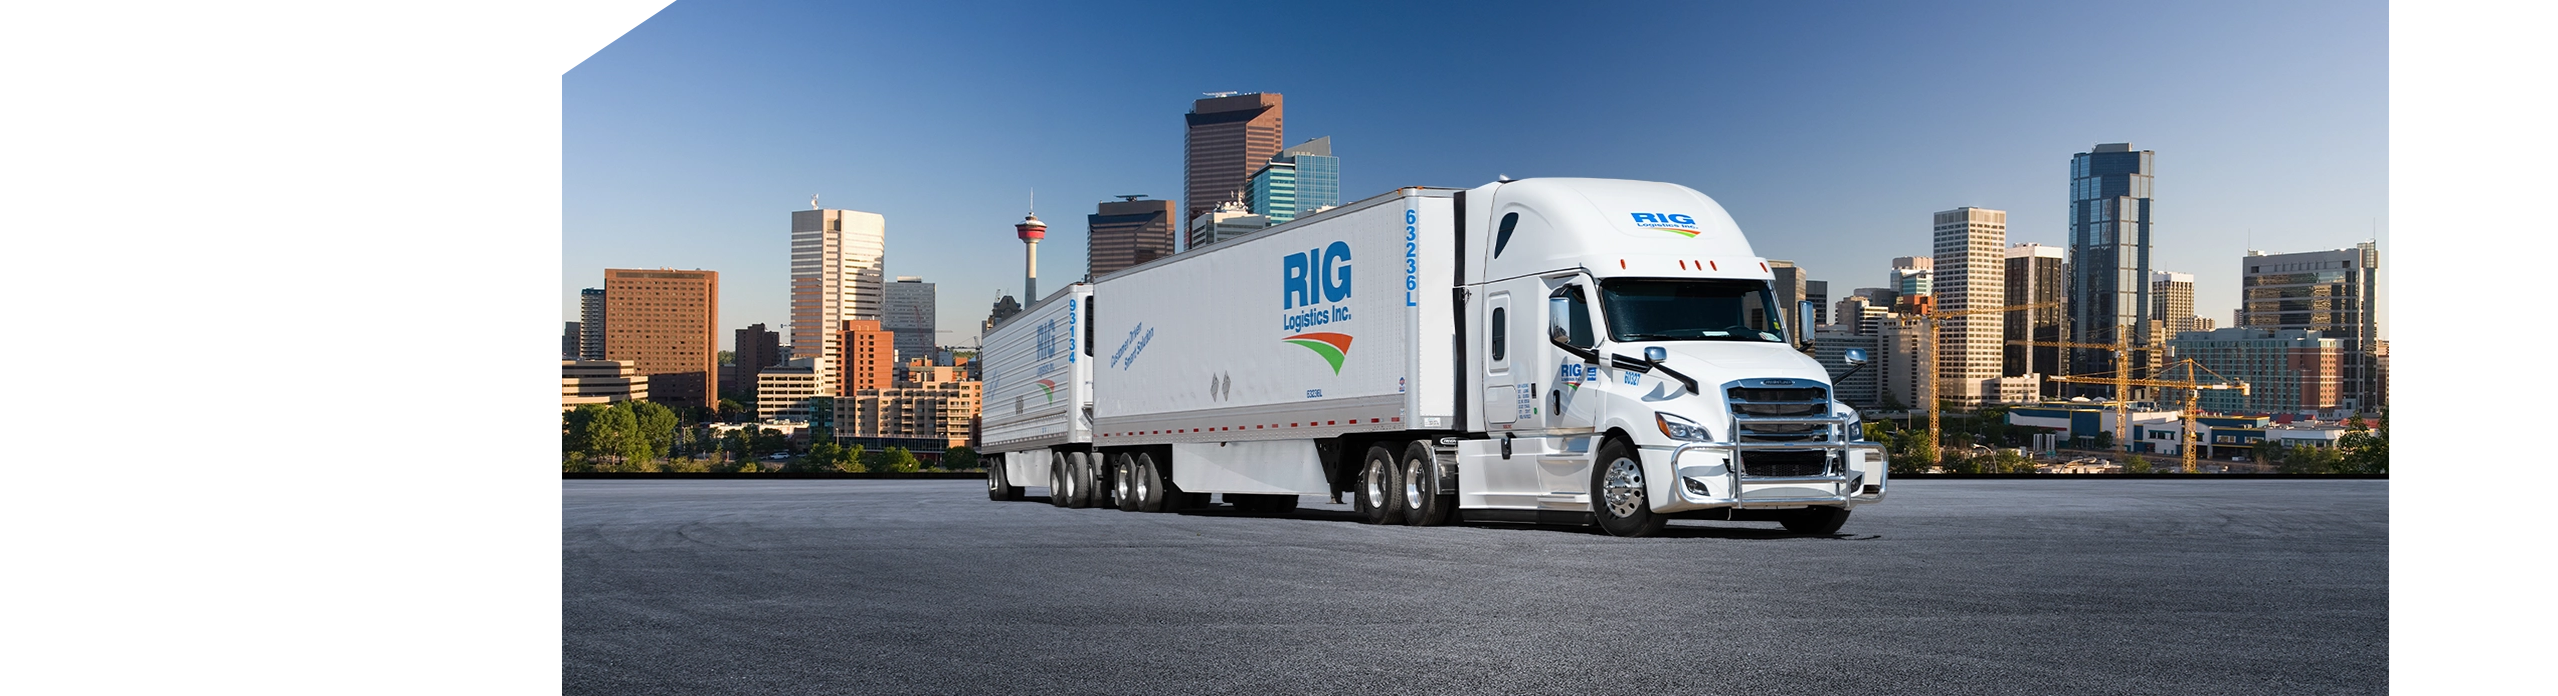 RIG Logistics long combination vehicle (LCV) driving in front of Calgary, Alberta cityscape